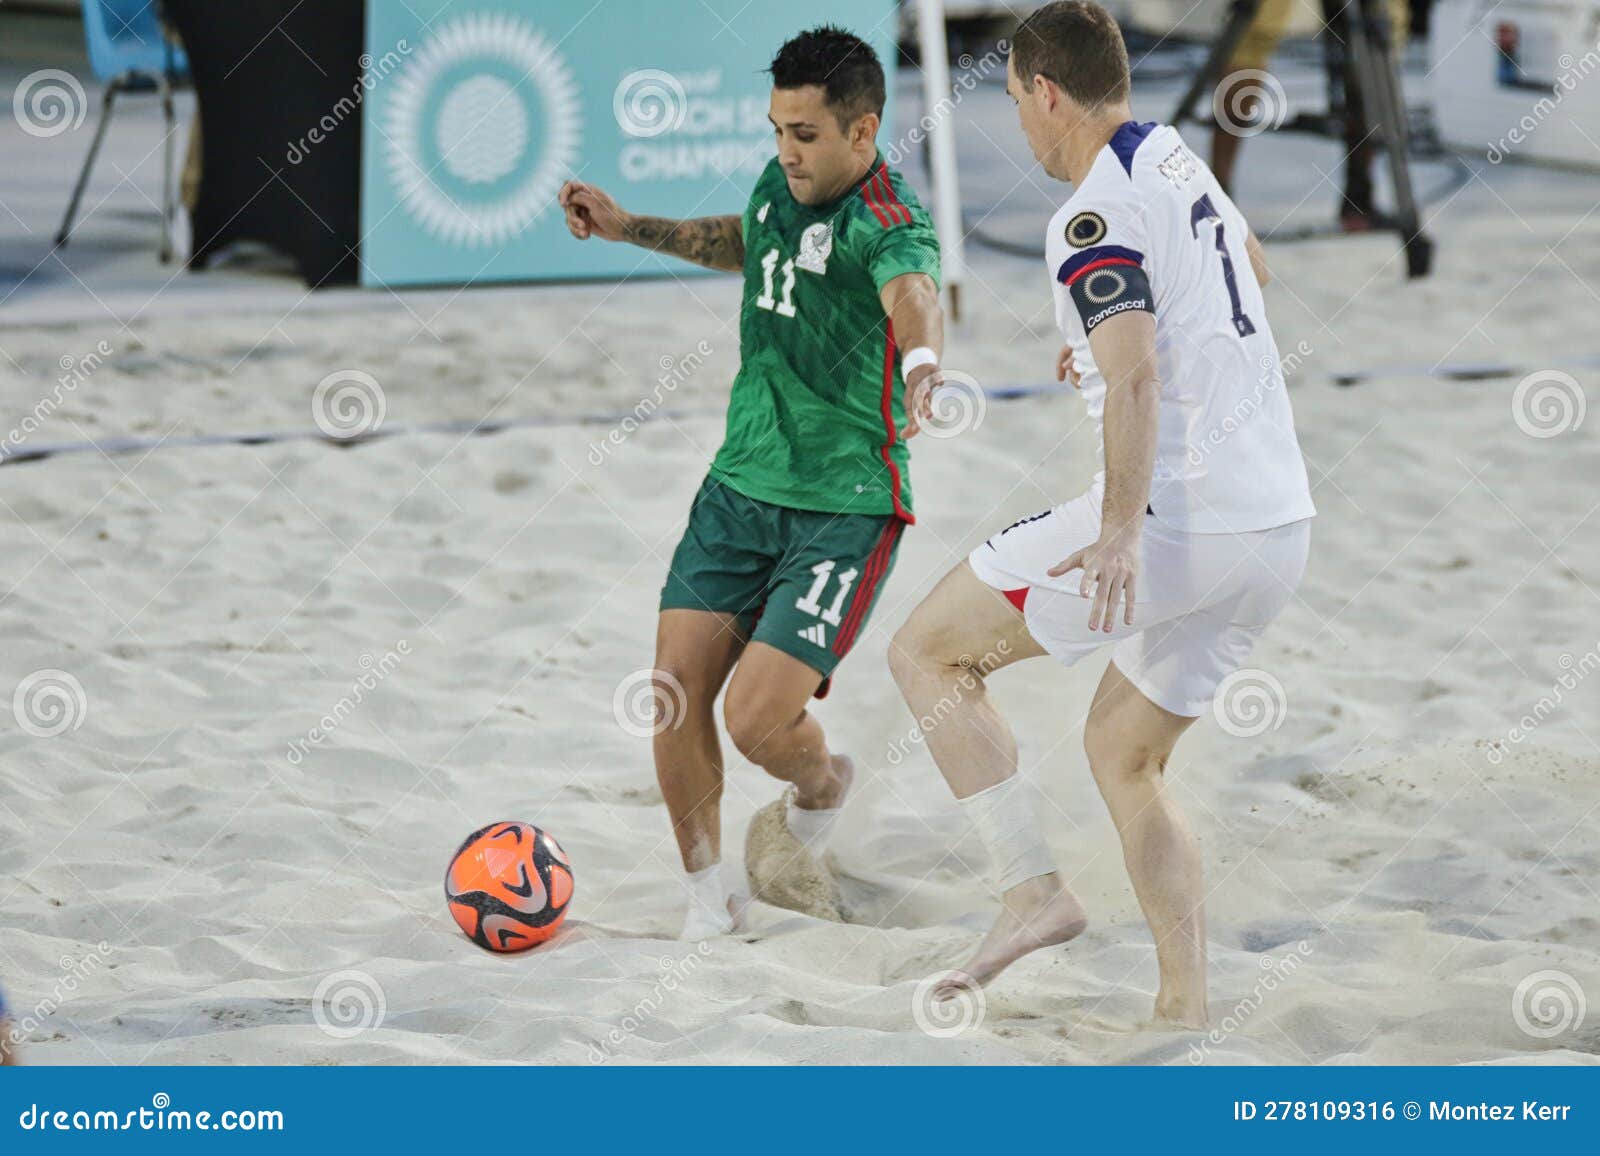 USA Tops Mexico 50 for Beach Soccer Title in the CONCACAF Beach Soccer